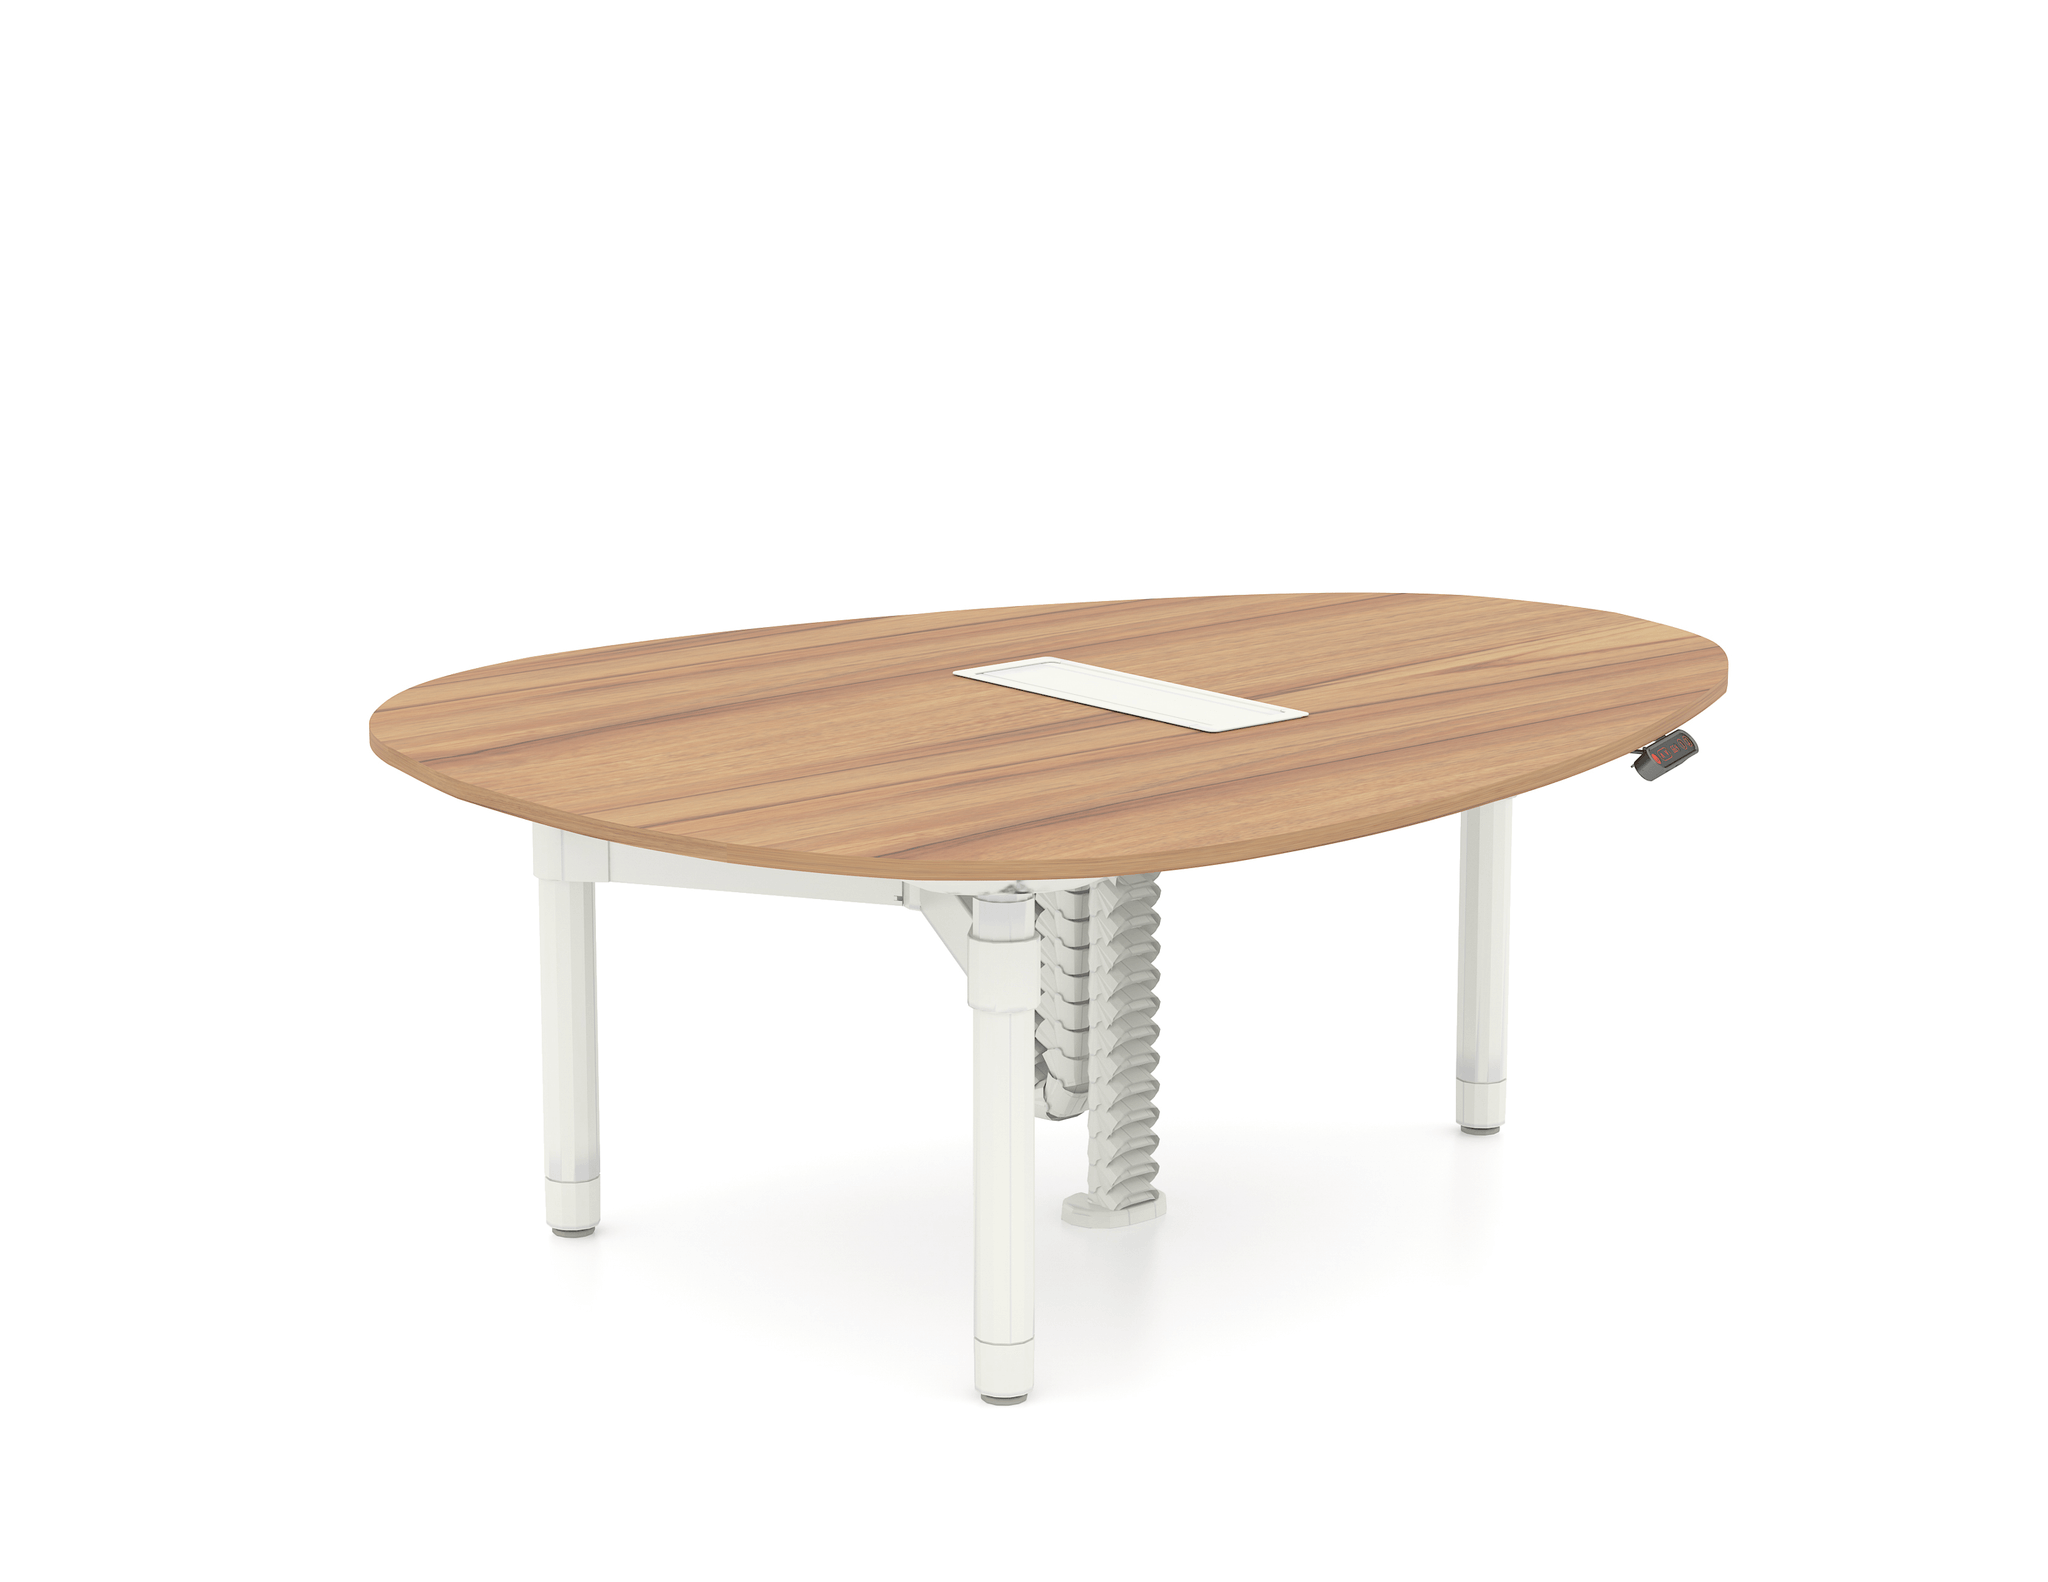 Shift Levels Sit-to-Stand Table with wooden top